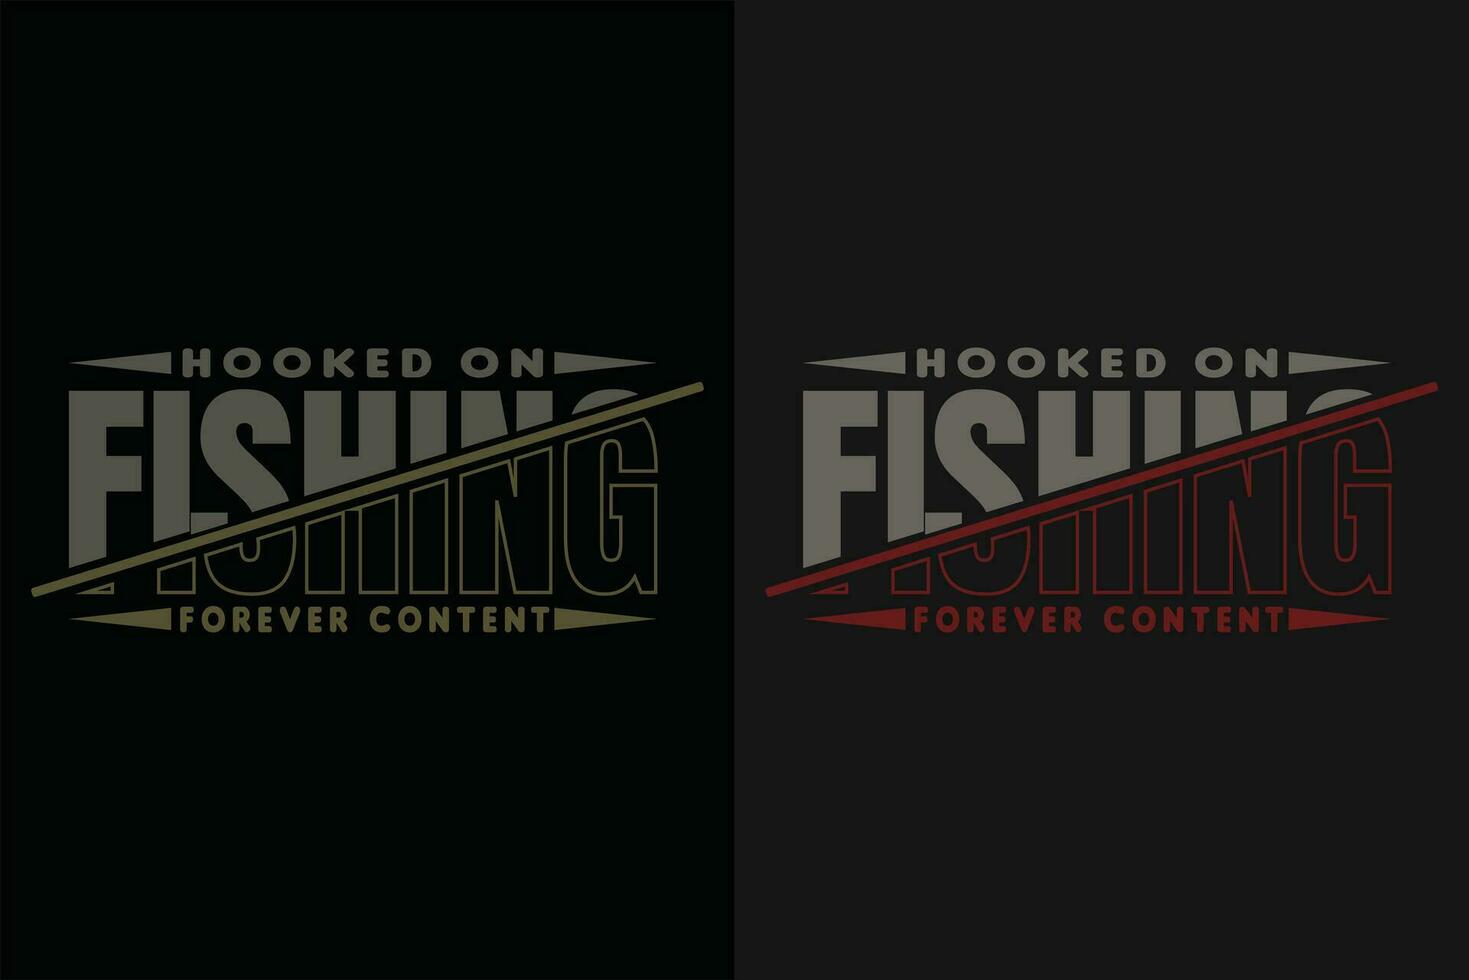 Hooked On Fishing Forever Content, Fishing Shirt, Fisherman Gifts, Fisherman T-Shirt, Funny Fishing Shirt, Present For fisherman, Fishing Gift, Fishing Dad Gifts, Fishing Lover Shirt, Men's Fishing vector